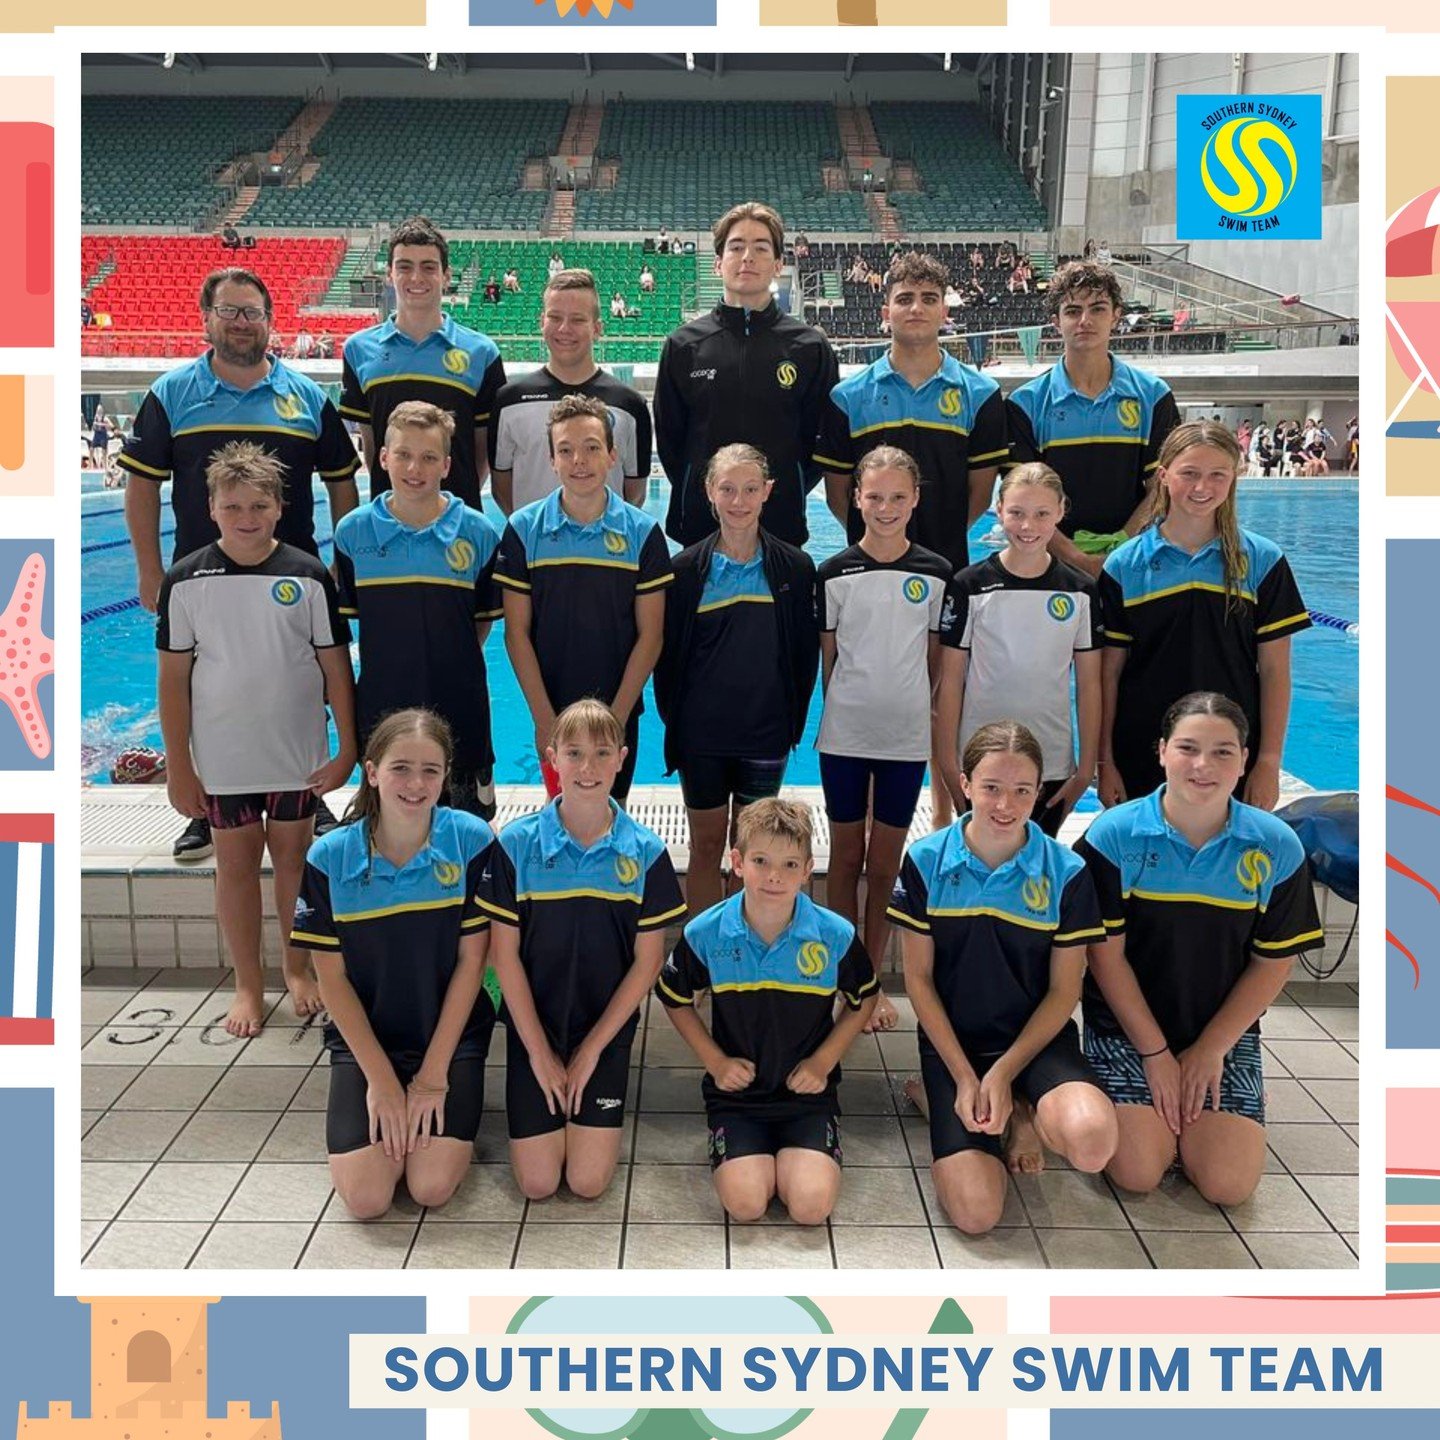 🌟 Announcing our next @cronullarsl Community Raffle! 🌟

On May 10th, the Southern Sydney Swim Team will be fundraising at our Club, to raise funds to help send members of their team to the Australian Olympic and Paralympic trials at Brisbane in Jun